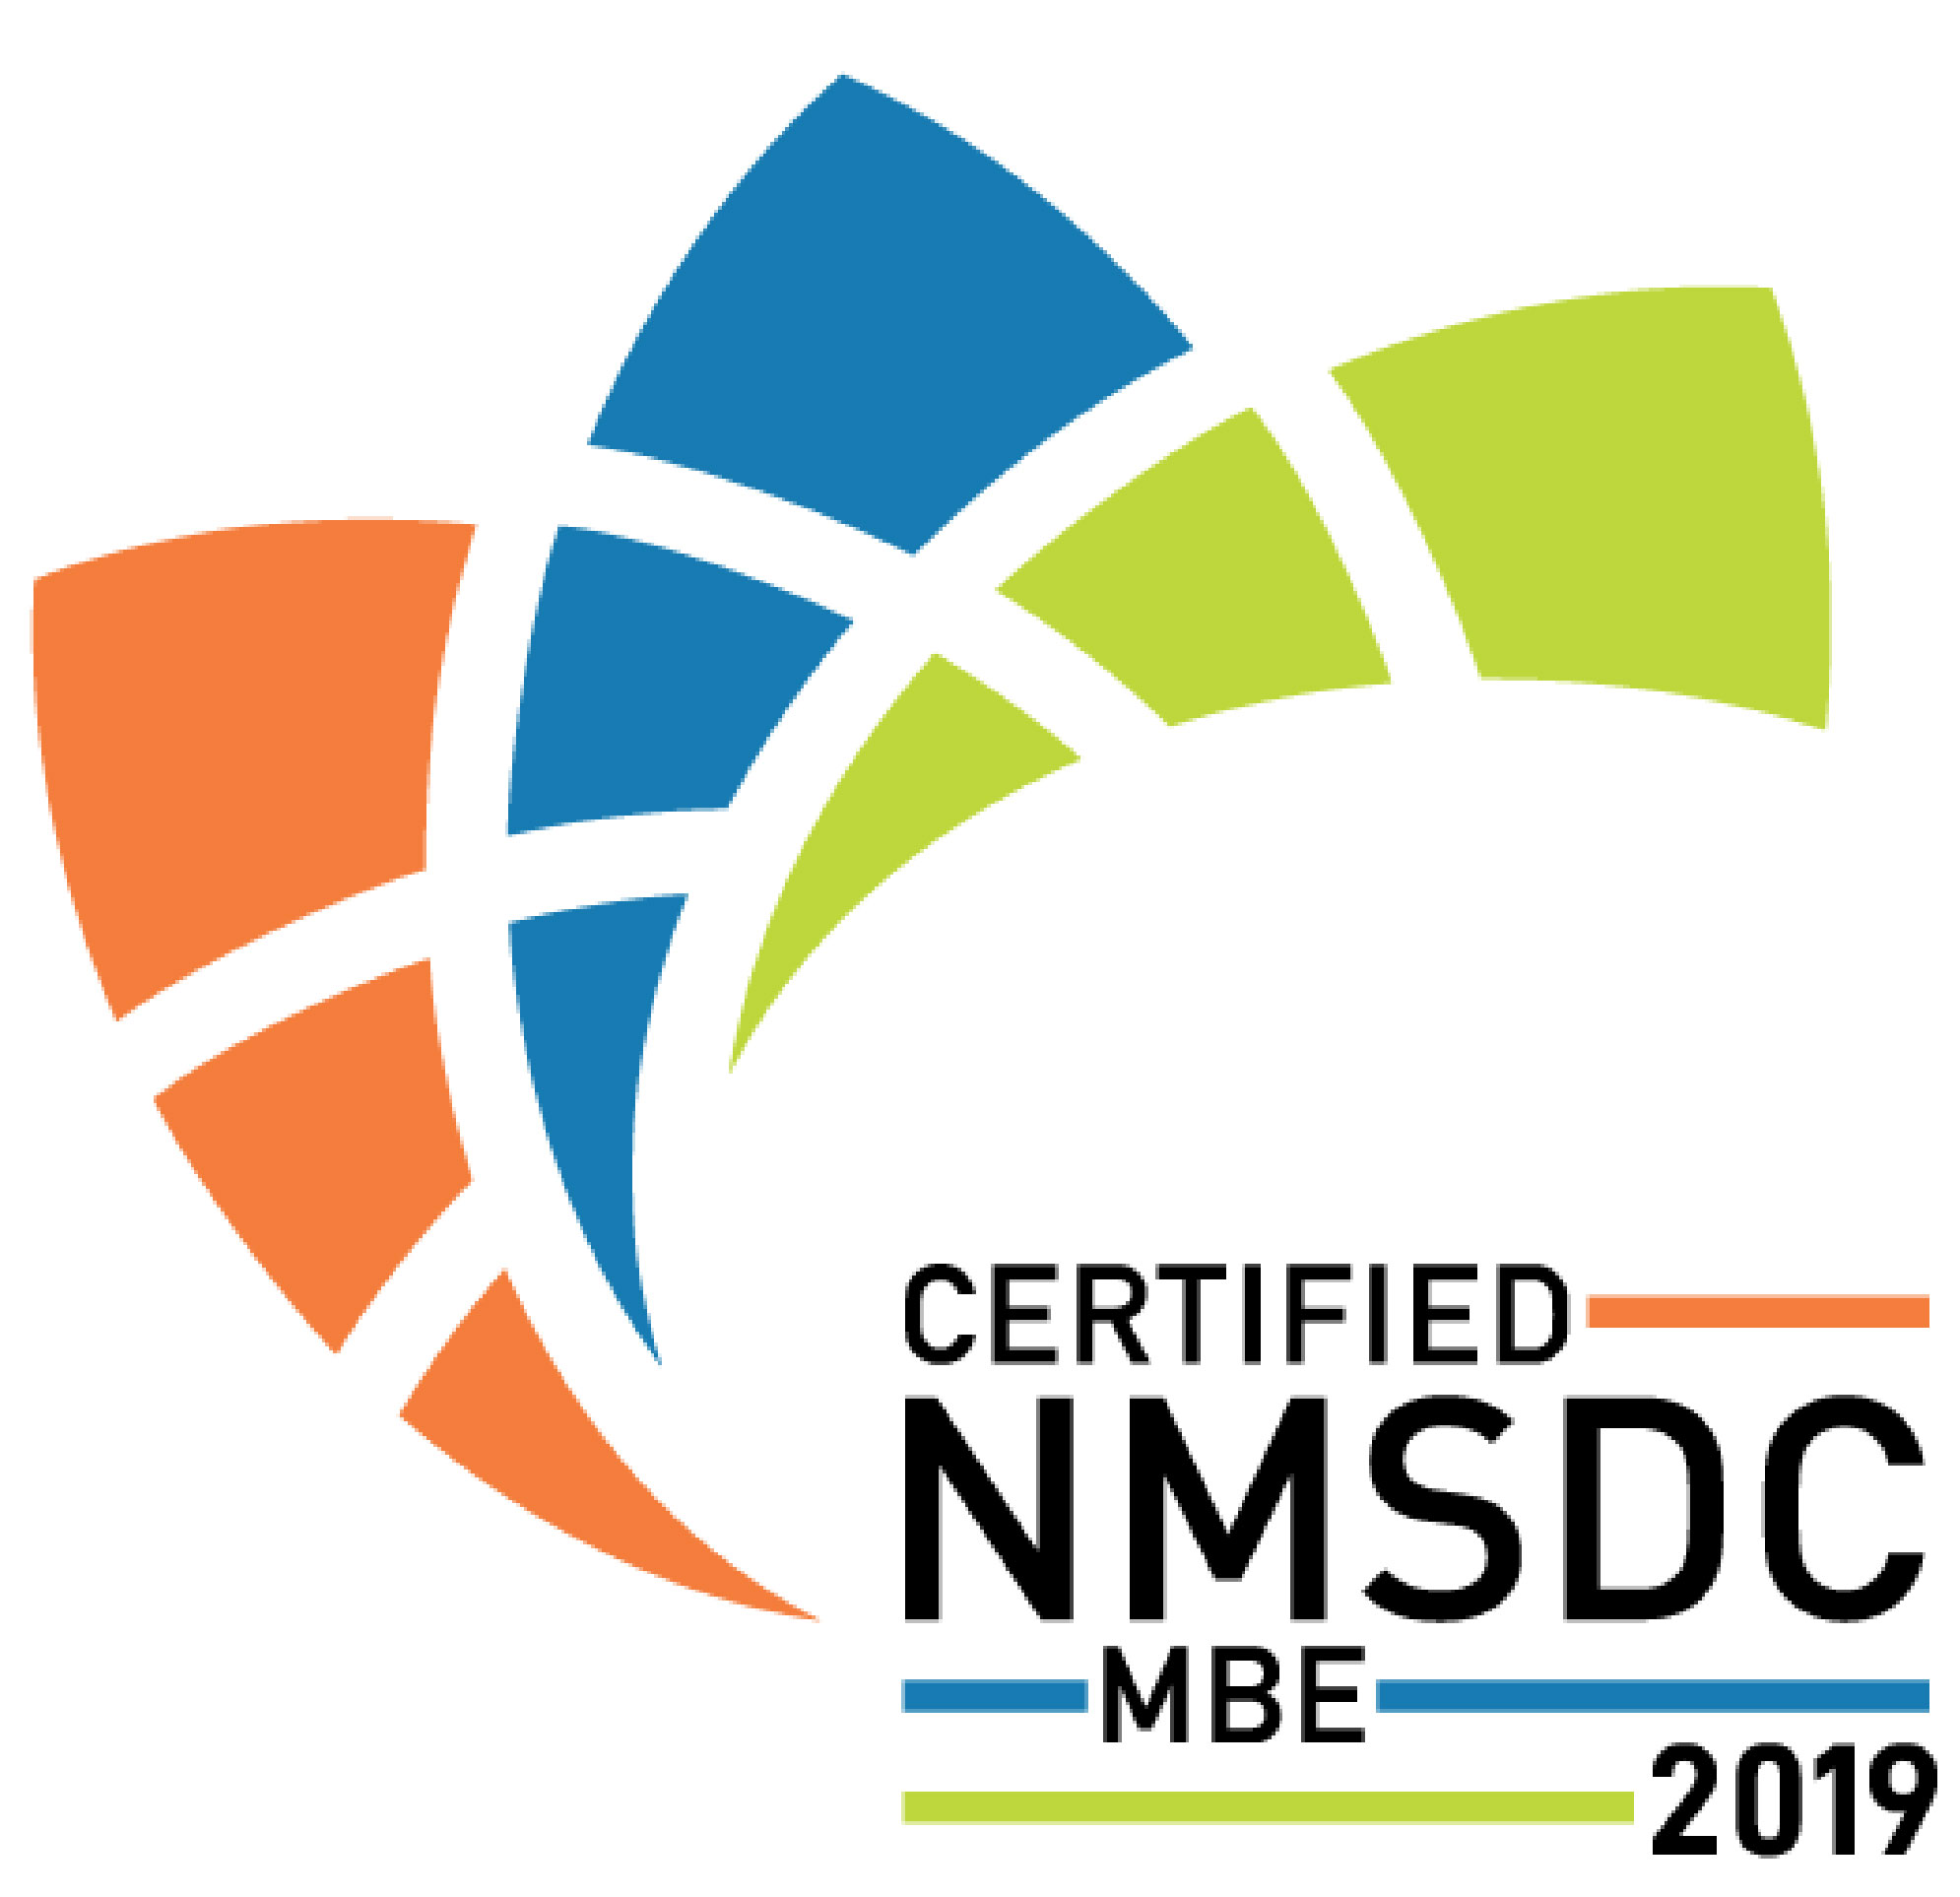 https://commonmedia.asicentral.com/4520000/4521046/000NMSDC-Certified-2019.jpg